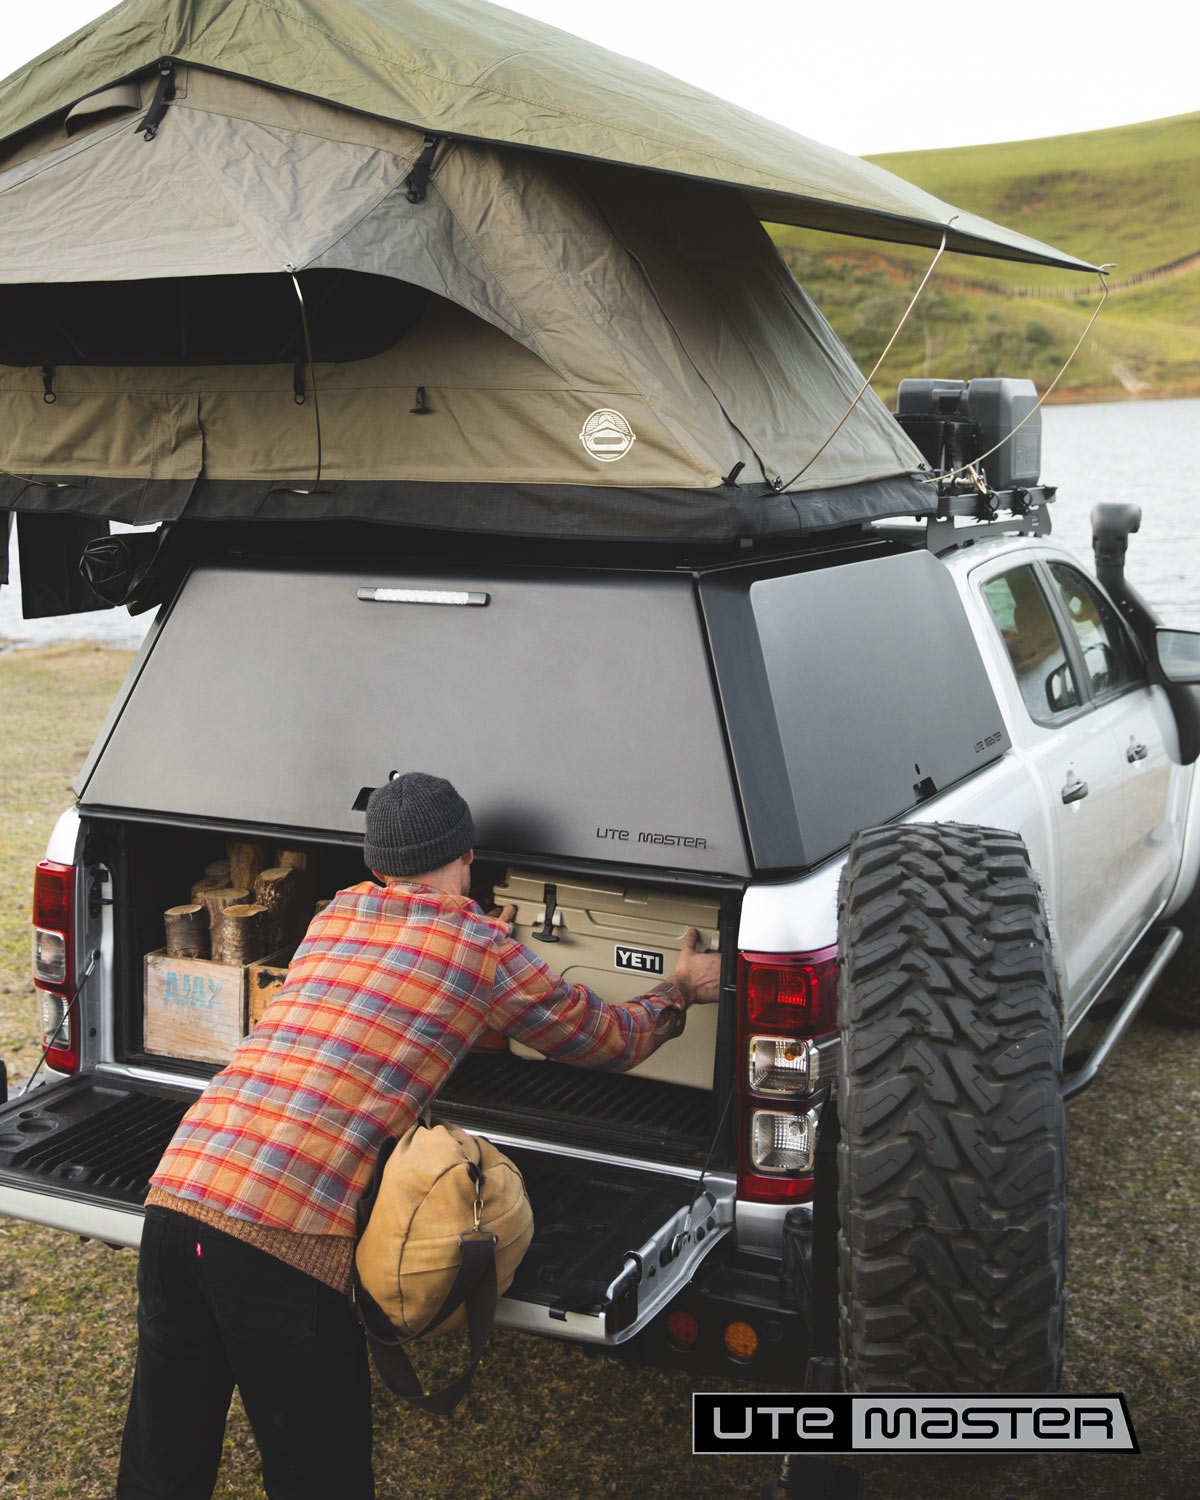 Utemaster Centurion Canopy for Overlanding Setup Roof Top Tent Mounting Canopy 4x4 